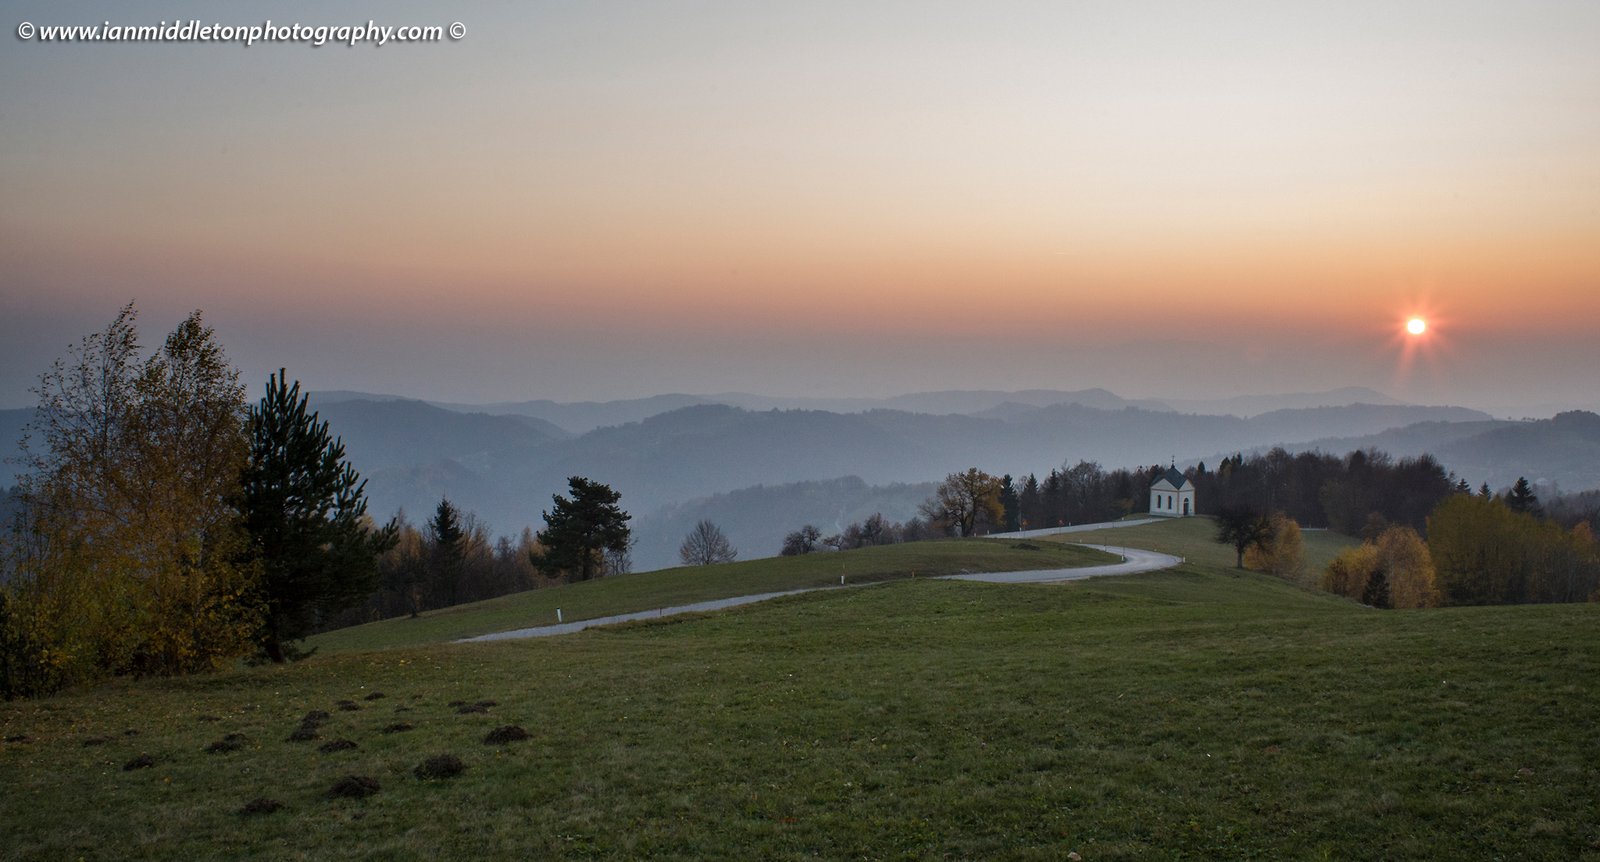 Autumn in the Jance hills to the east of Ljubljana, Slovenia. From here you get a great view of the western mountains.